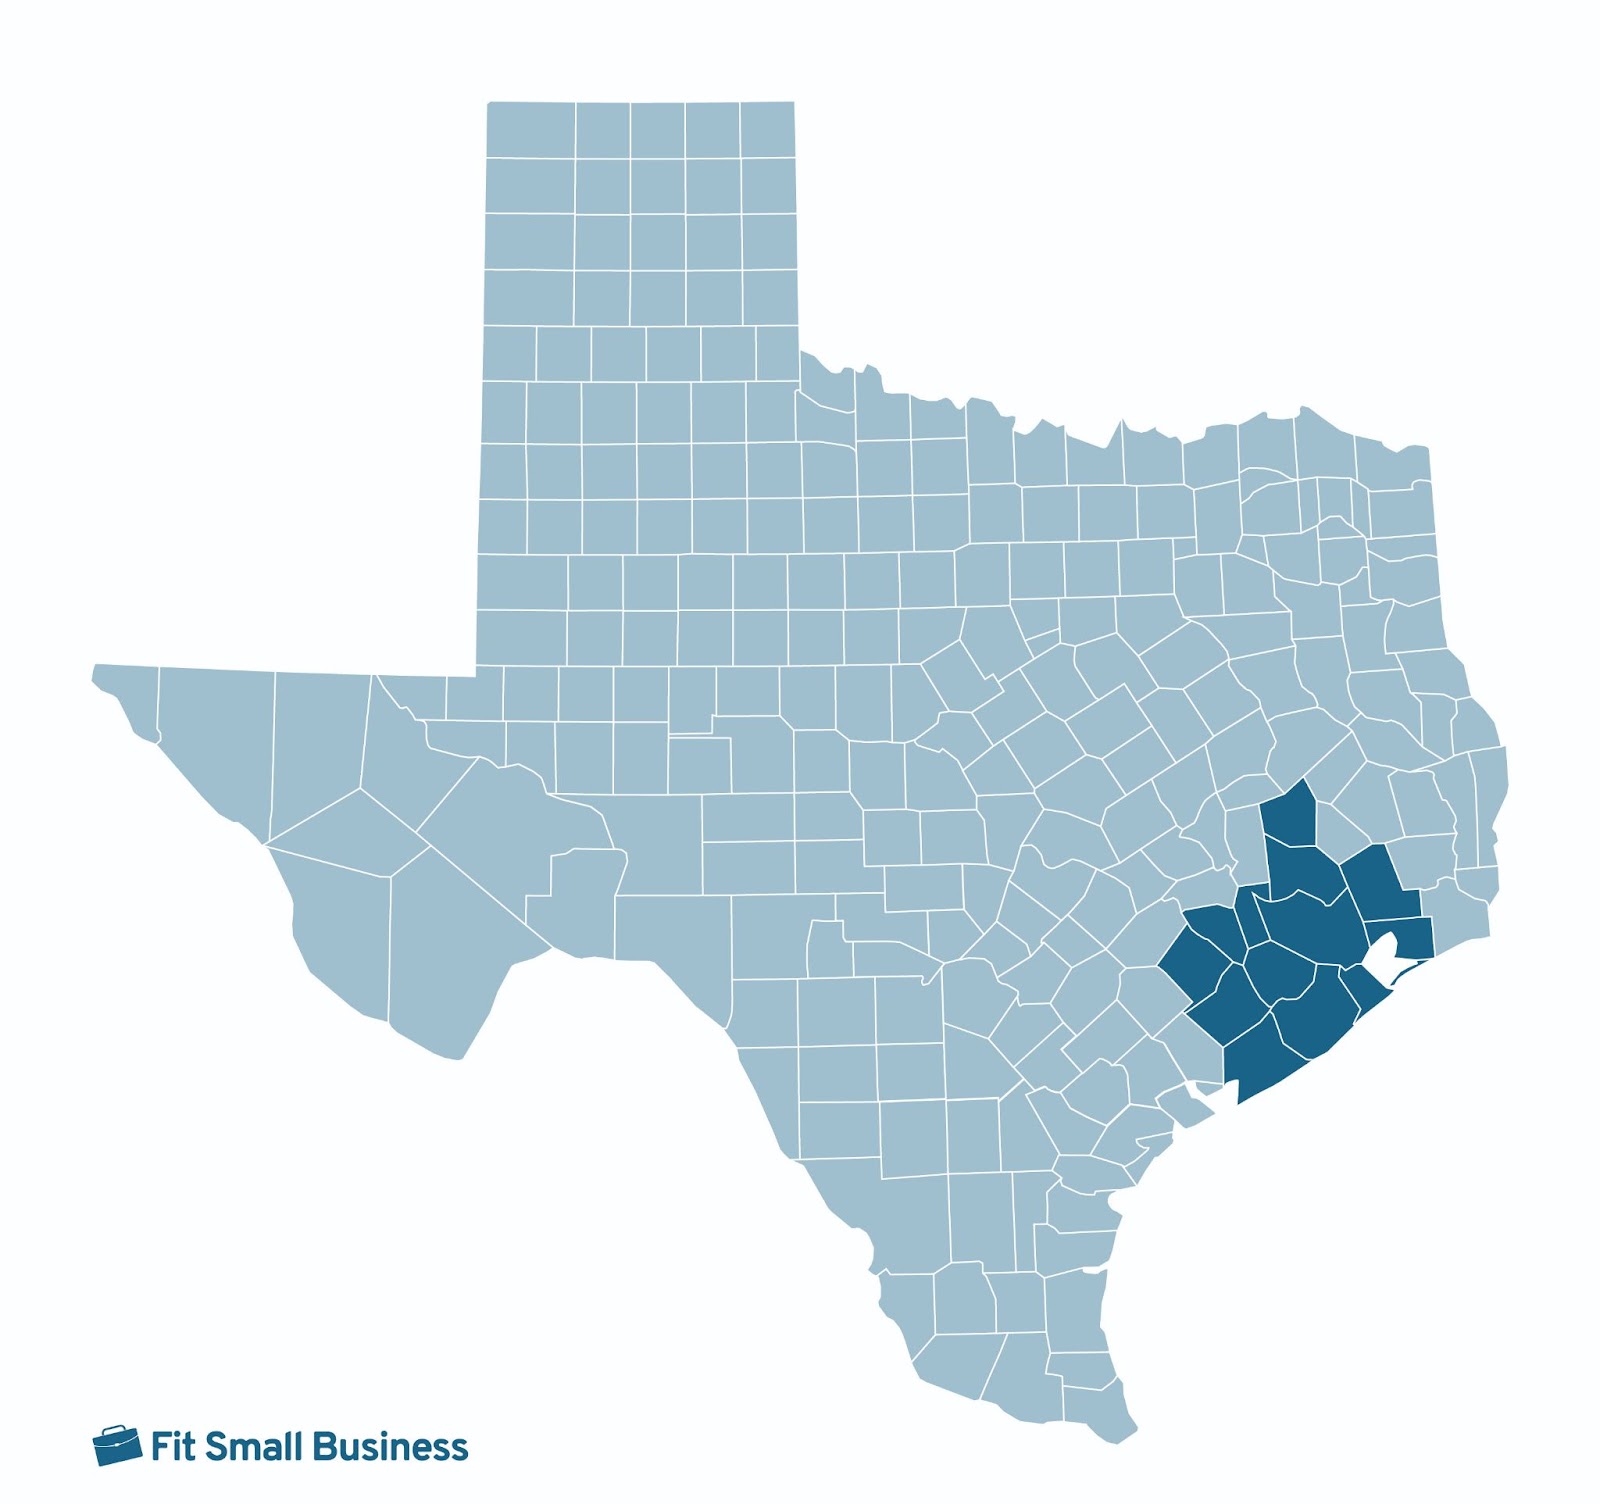 Other Business Banks in the Gulf Coast.